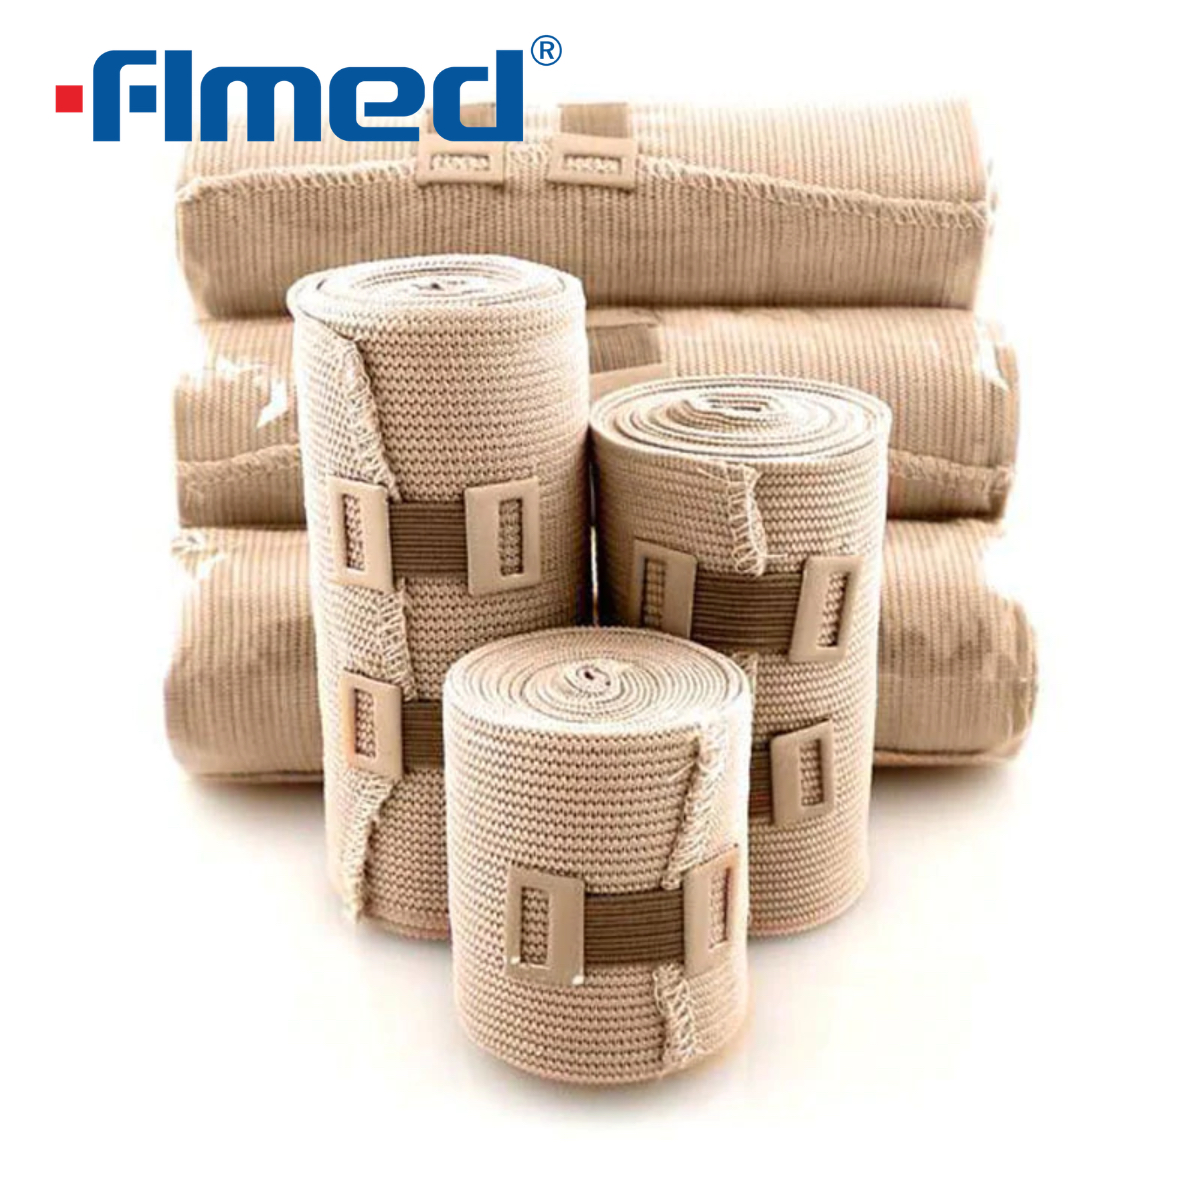 High Elastic Bandages: Providing Support and Compression in Healing